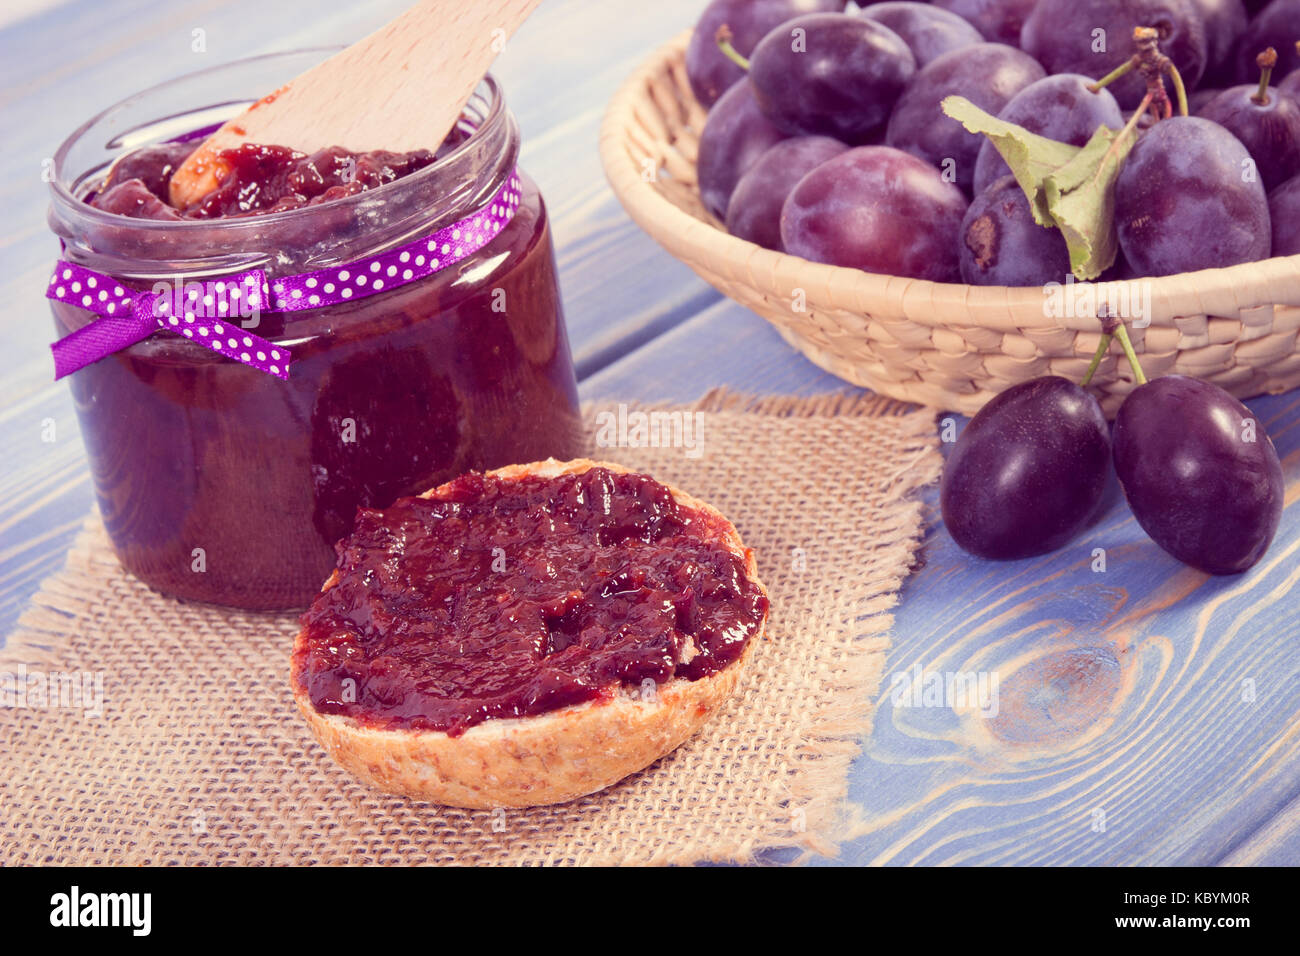 Preparation fresh sandwiches with homemade plum marmalade or jam, concept of healthy sweet snack, breakfast or dessert Stock Photo